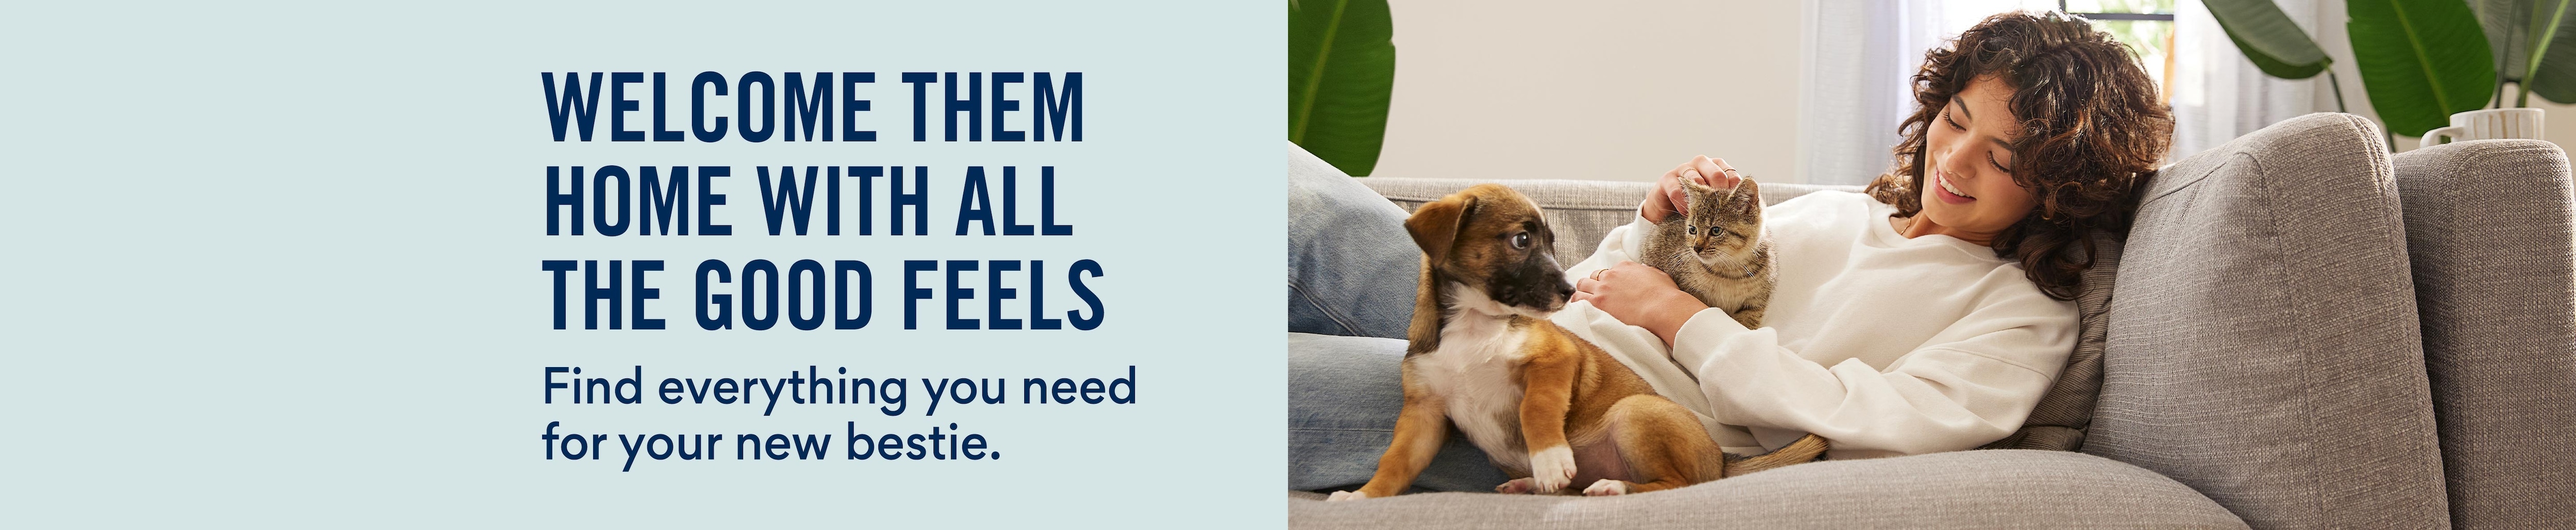 start the year on the right paw. find all the essentials and favs your new pet needs